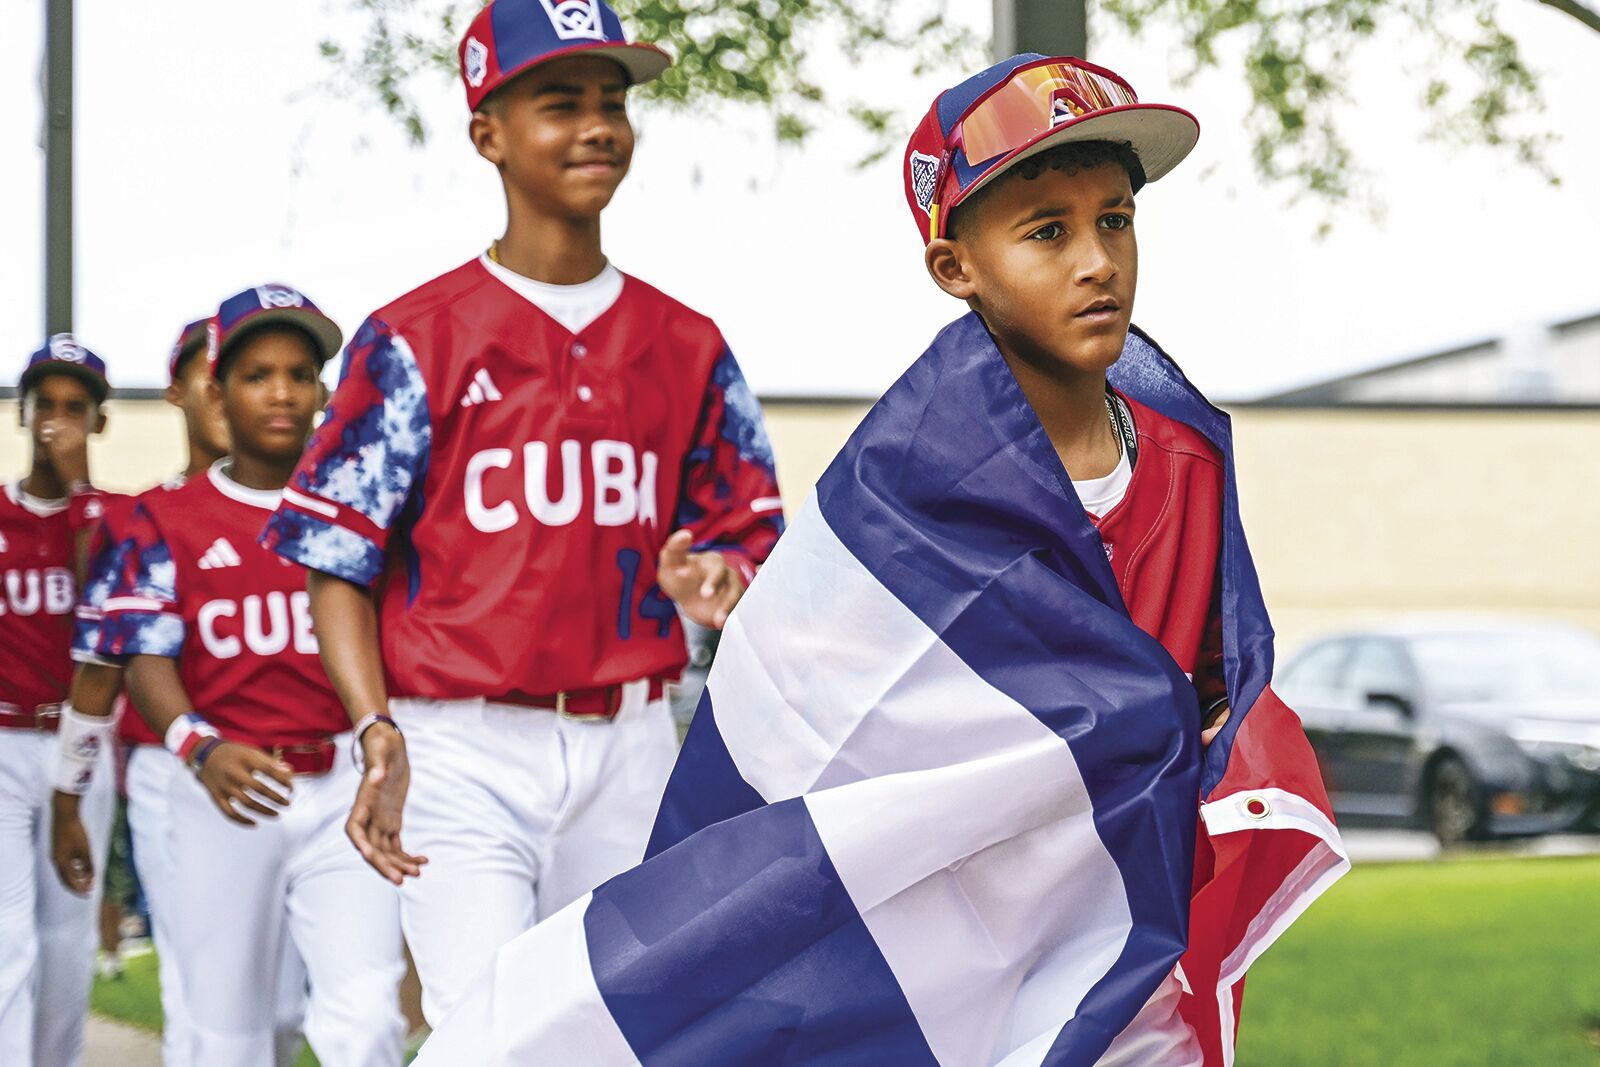 Cuba in Little League World Series for first time | Sports